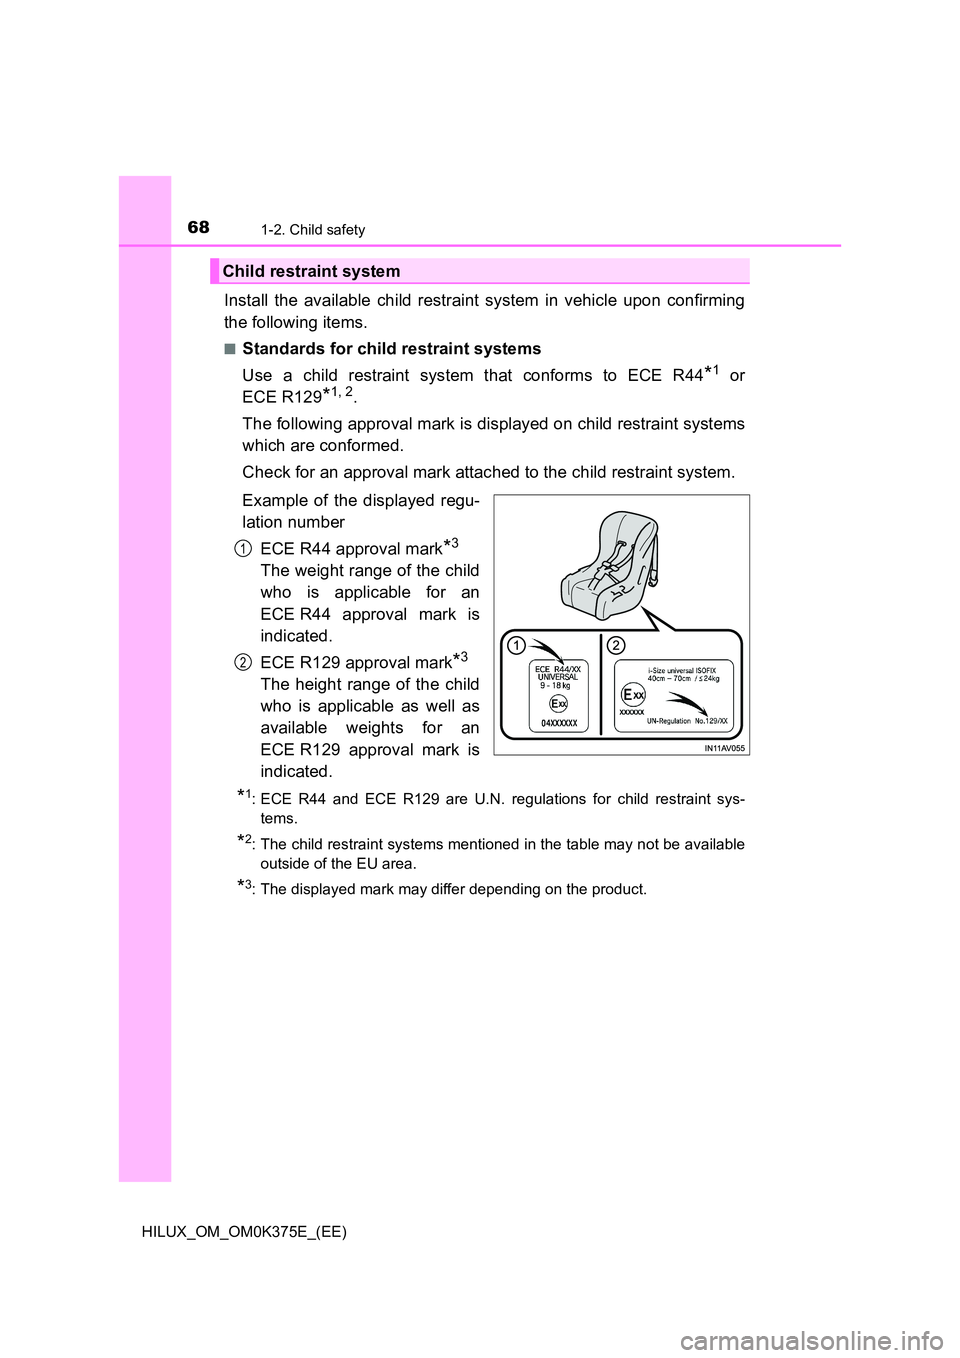 TOYOTA HILUX 2019  Owners Manual 681-2. Child safety
HILUX_OM_OM0K375E_(EE)
Install the available child restraint system in vehicle upon confirming 
the following items.
■Standards for child restraint systems 
Use a child restraint